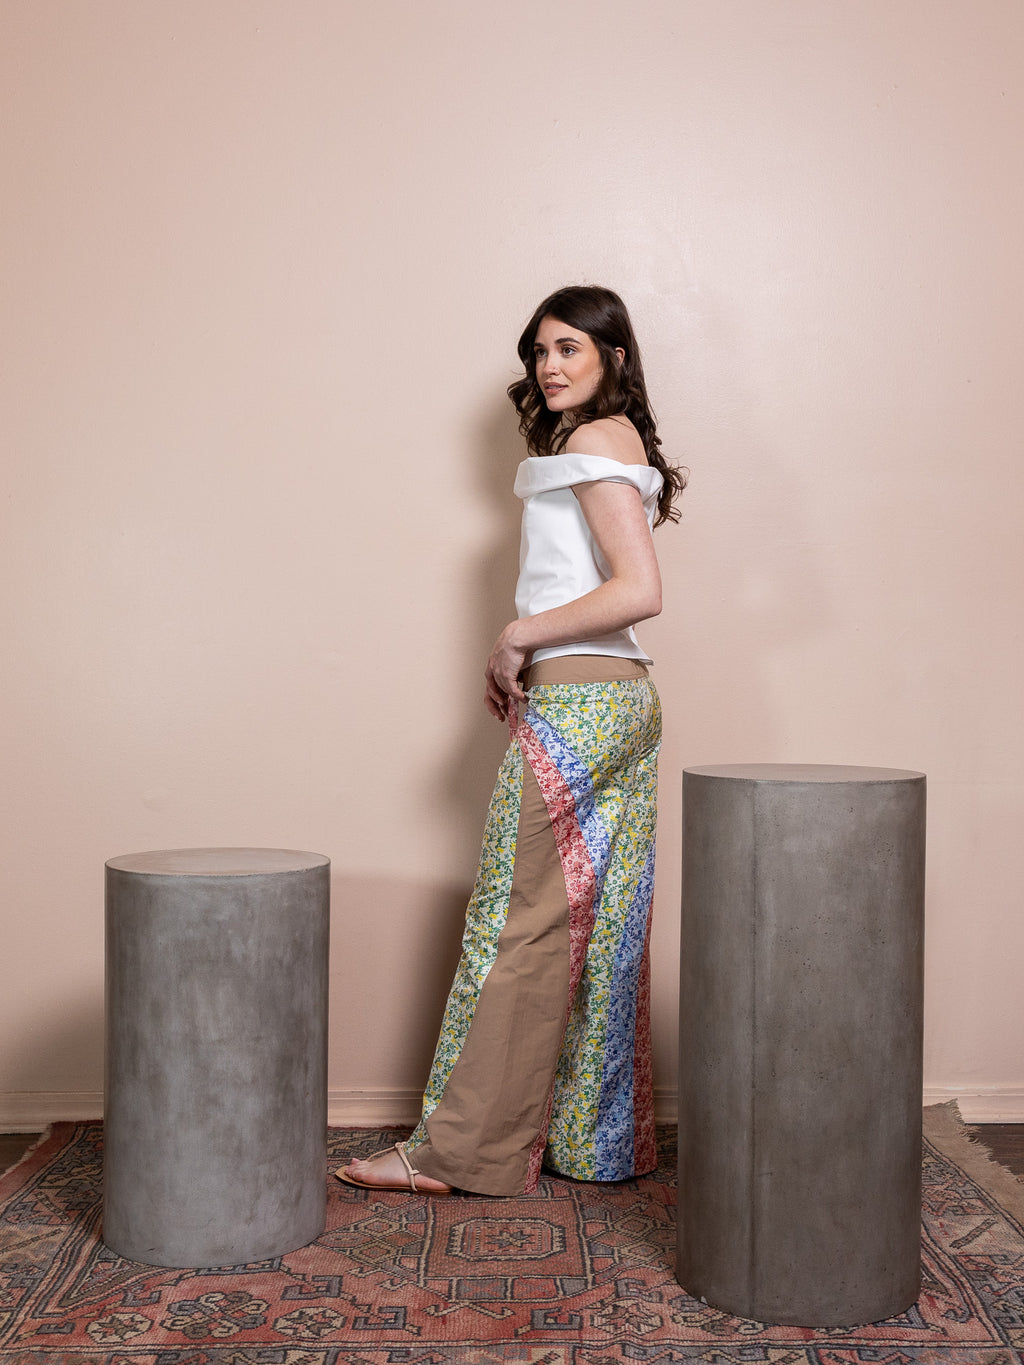 Woman in white top and floral pants against pink background